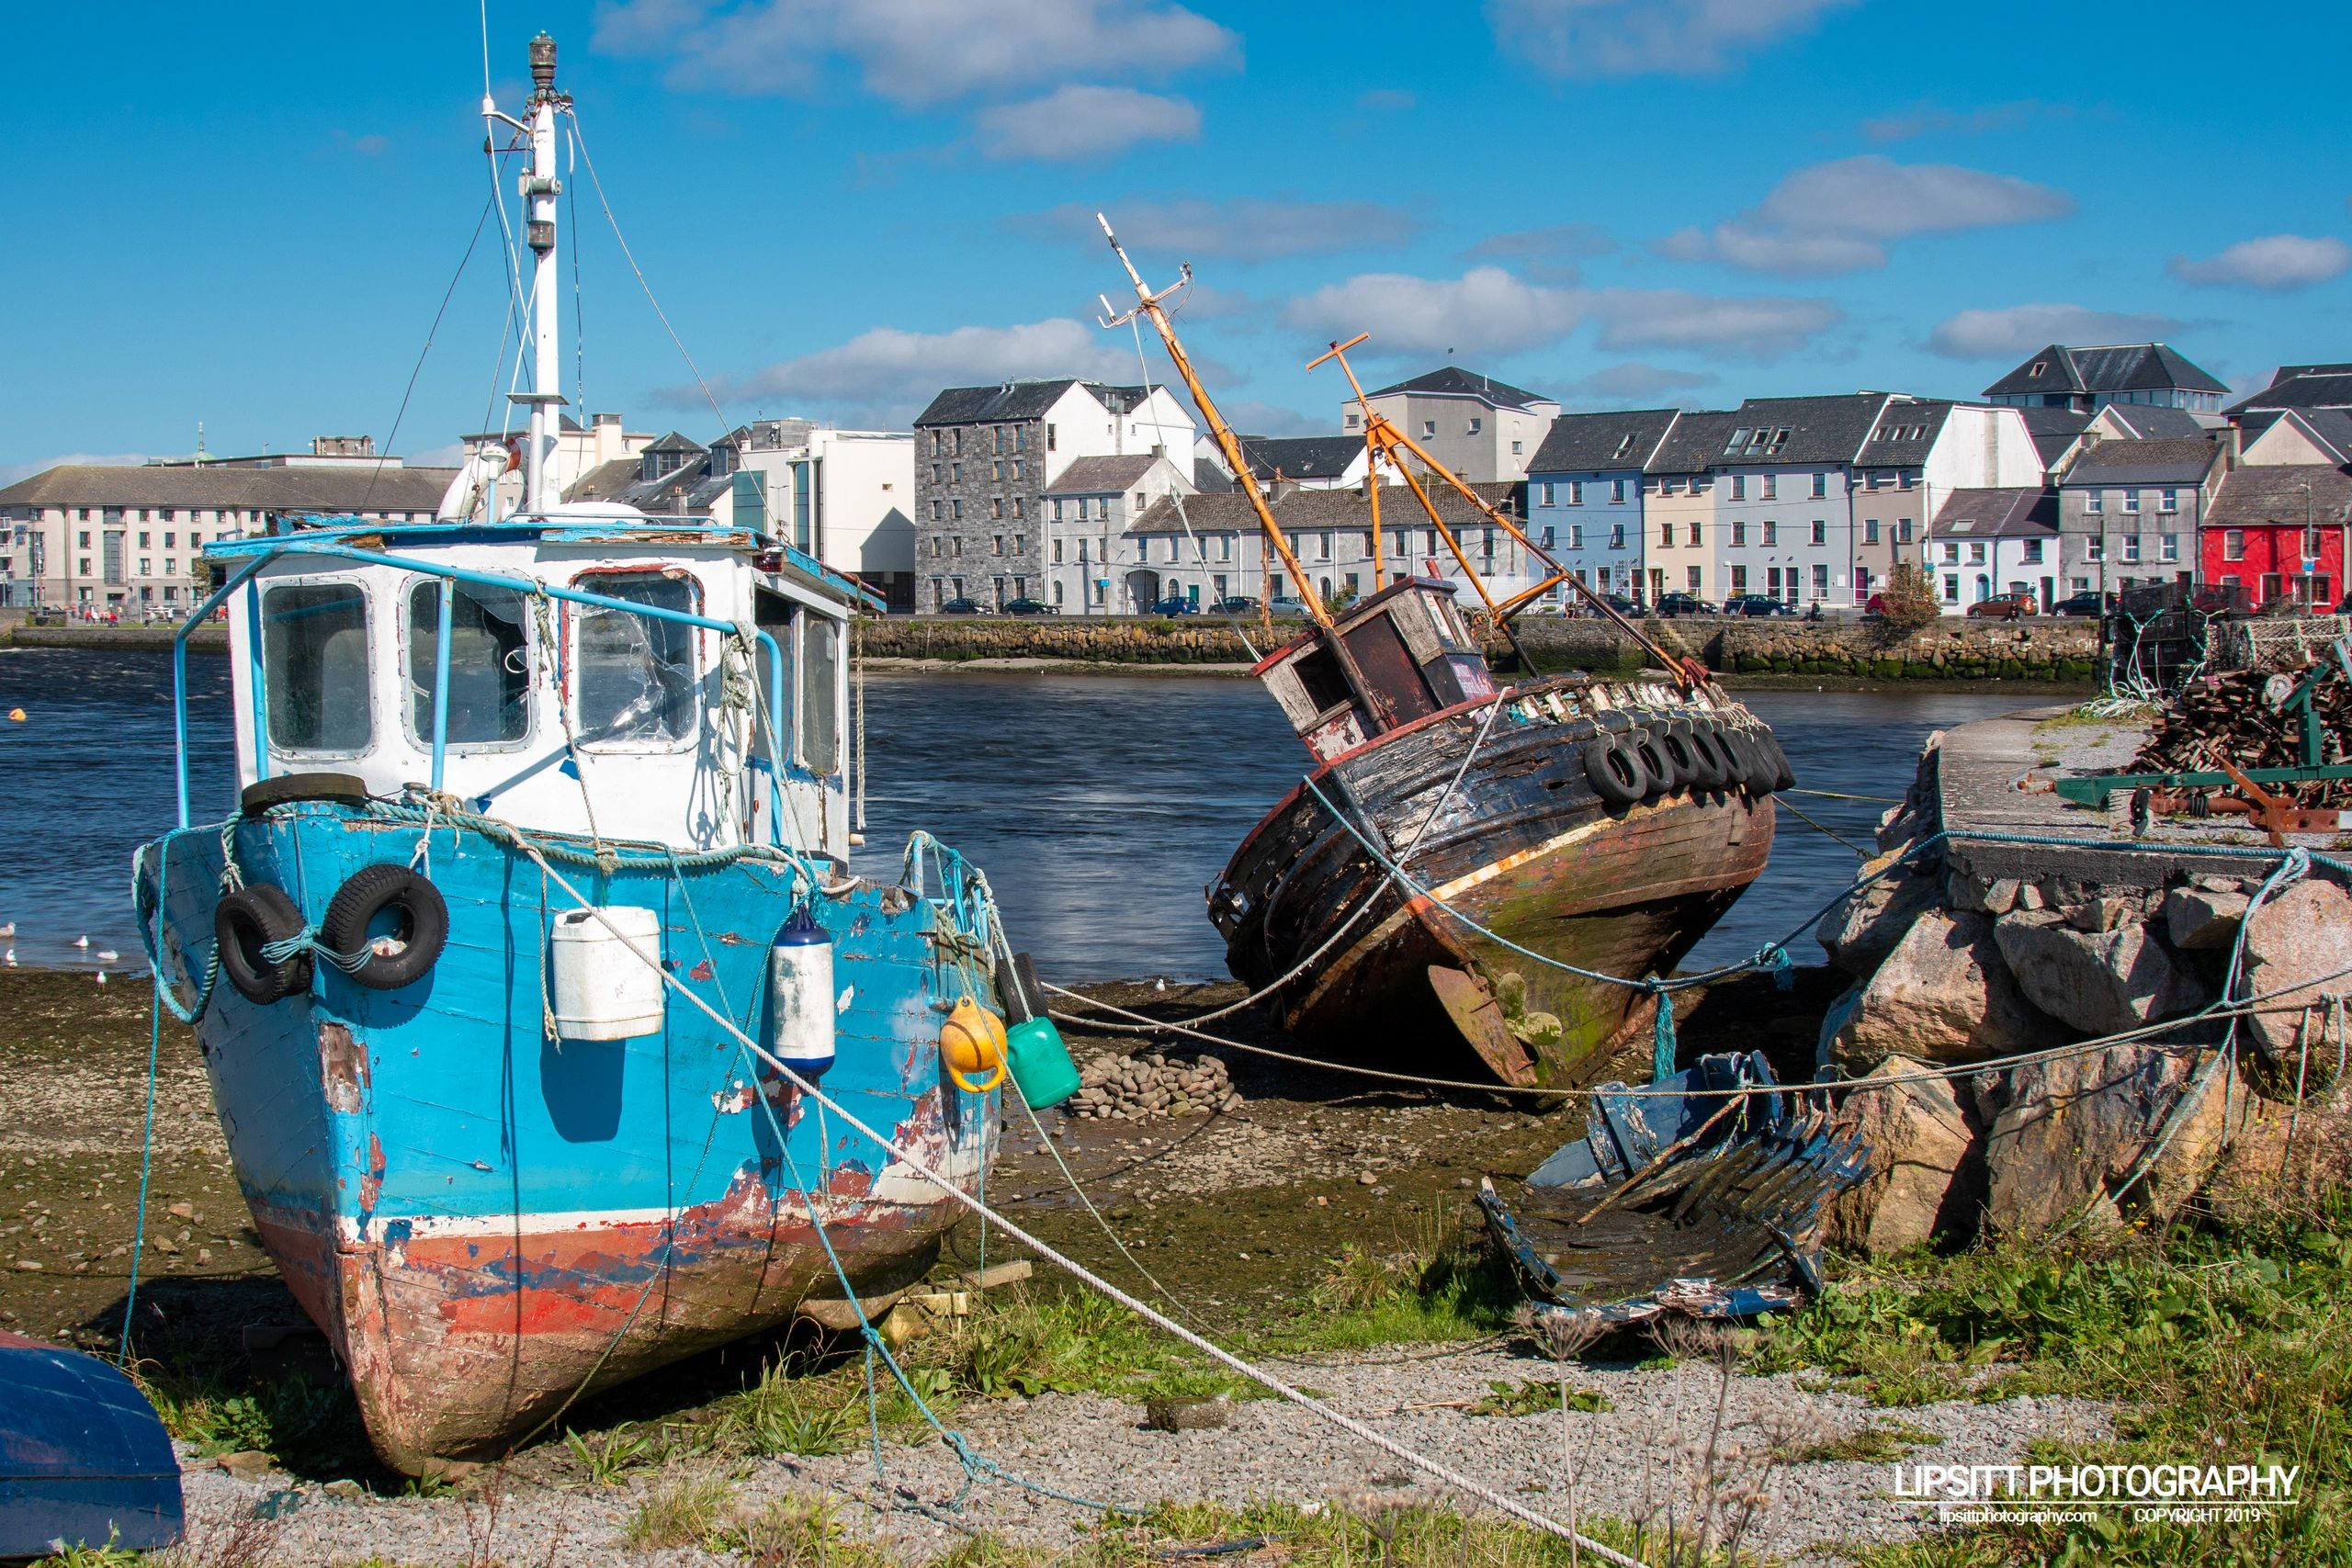 Out of Service, Nimmo’s Pier – Galway, Ireland